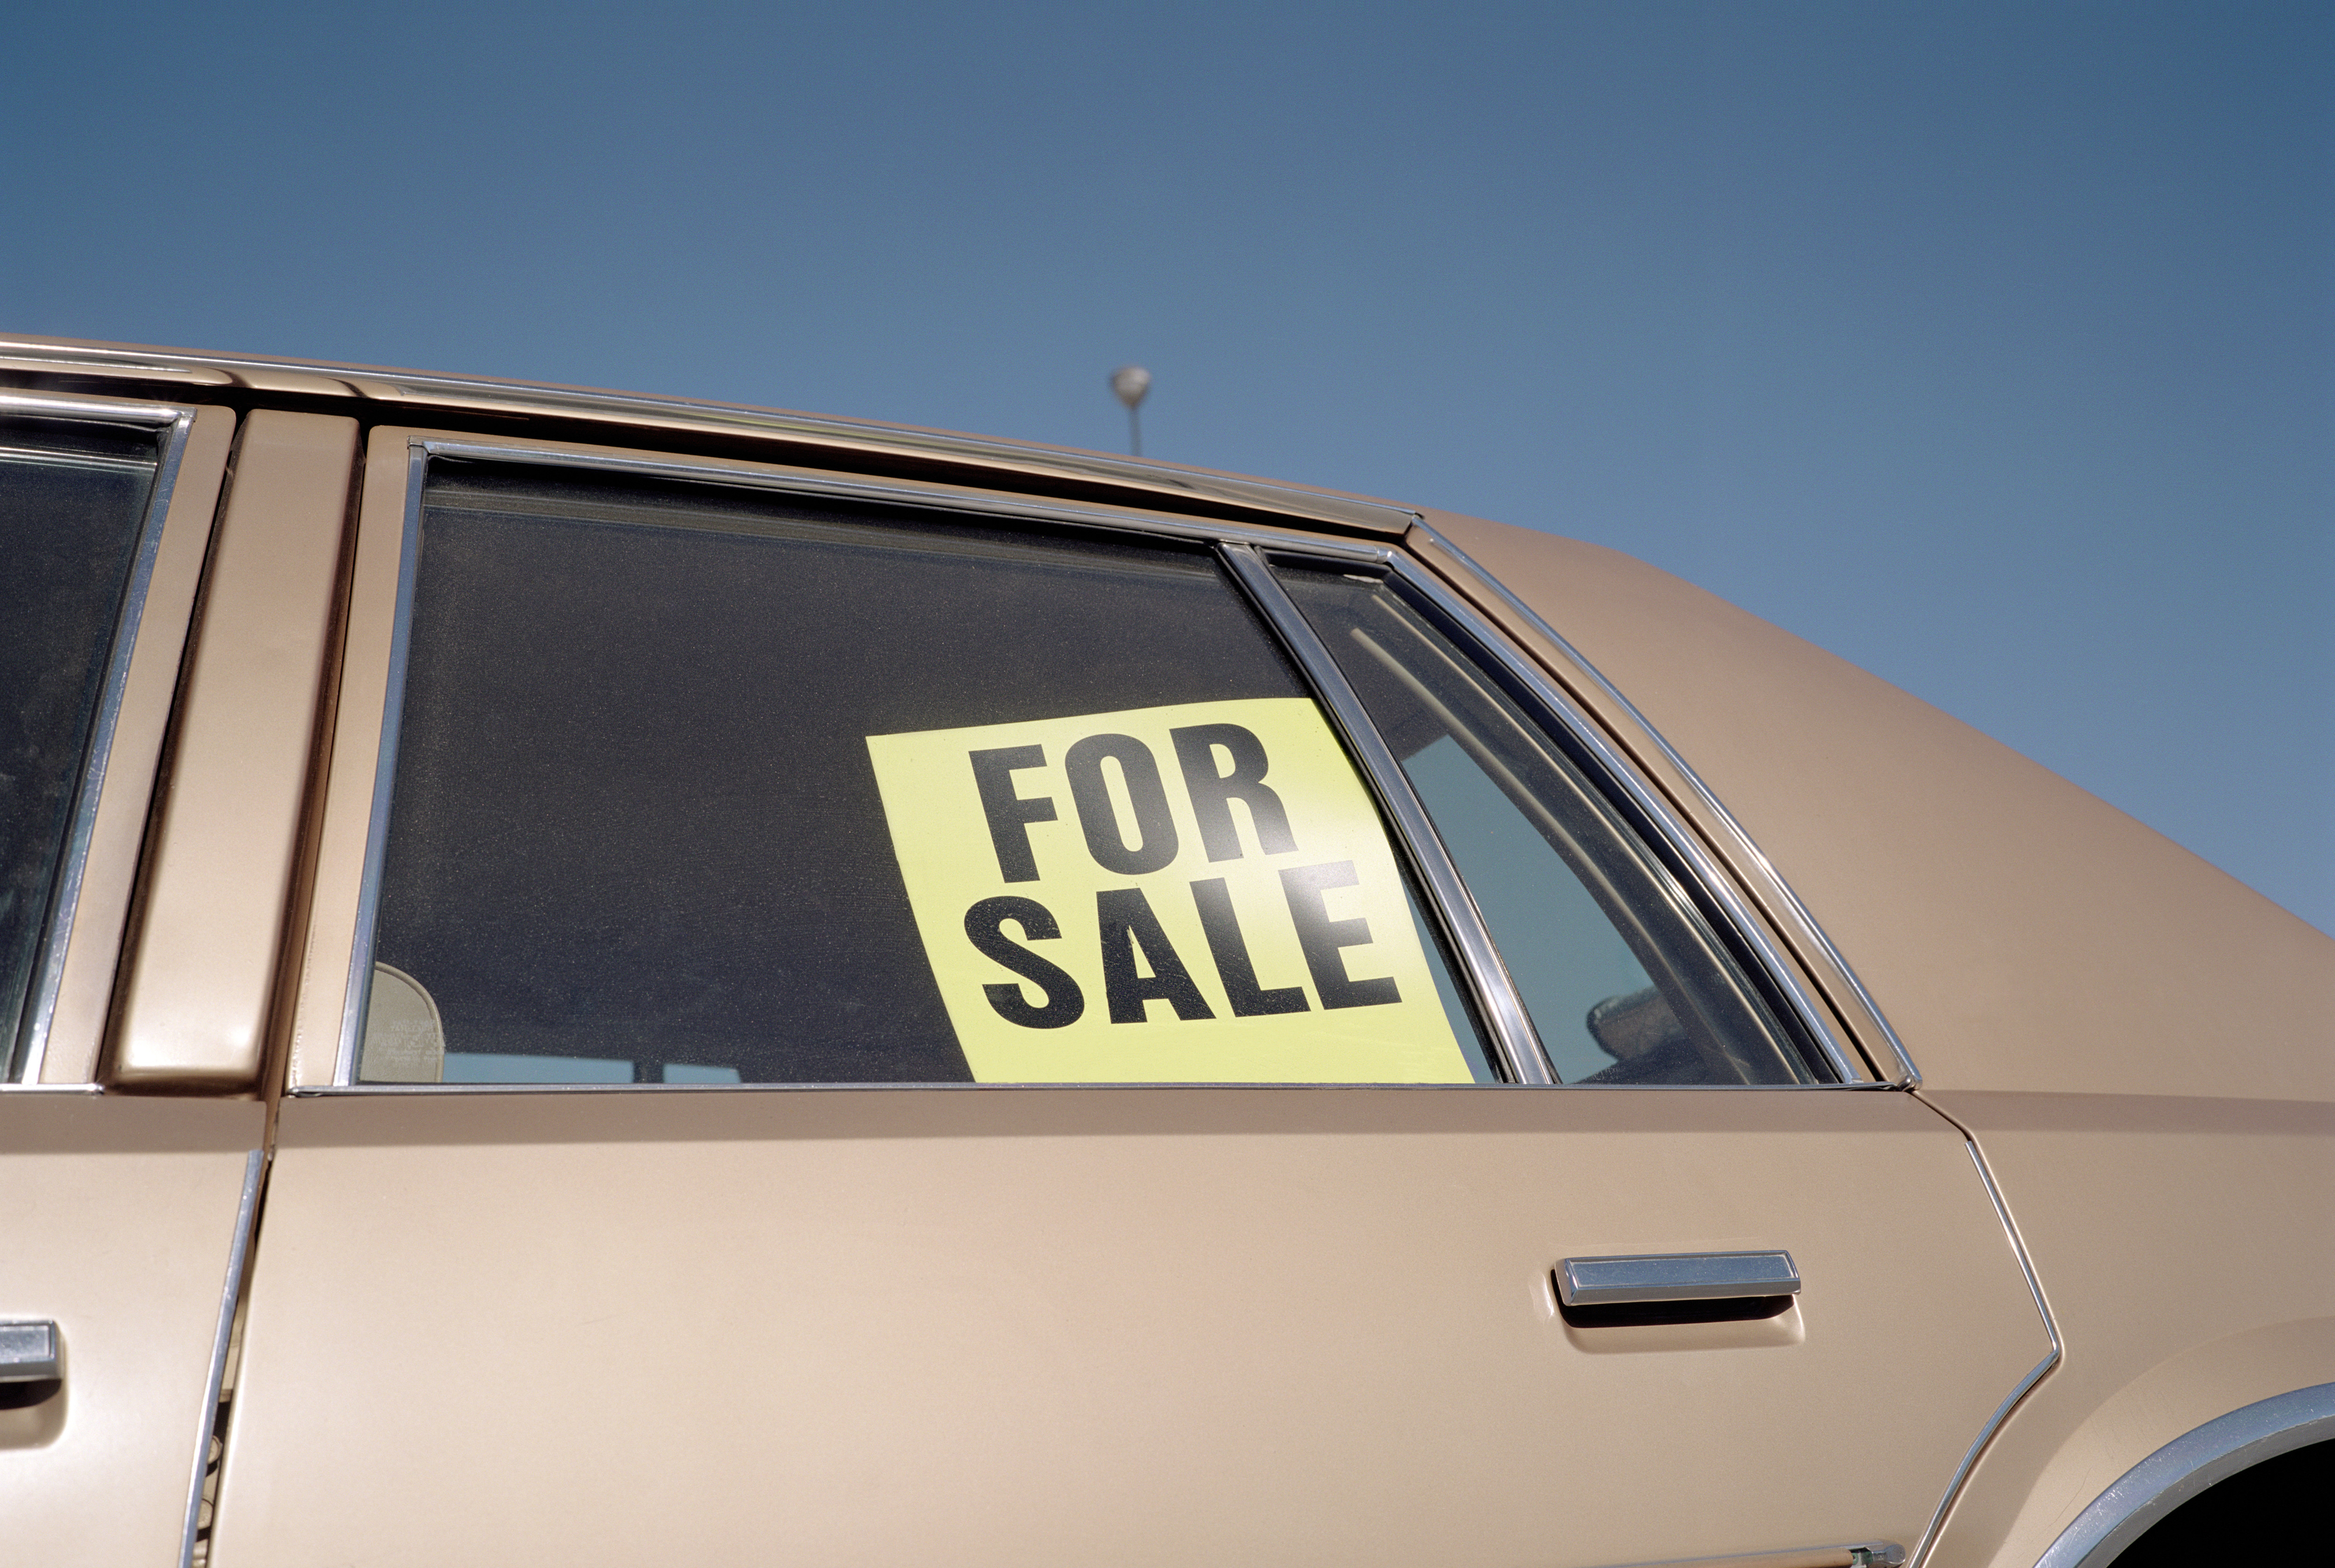 A used car for sale